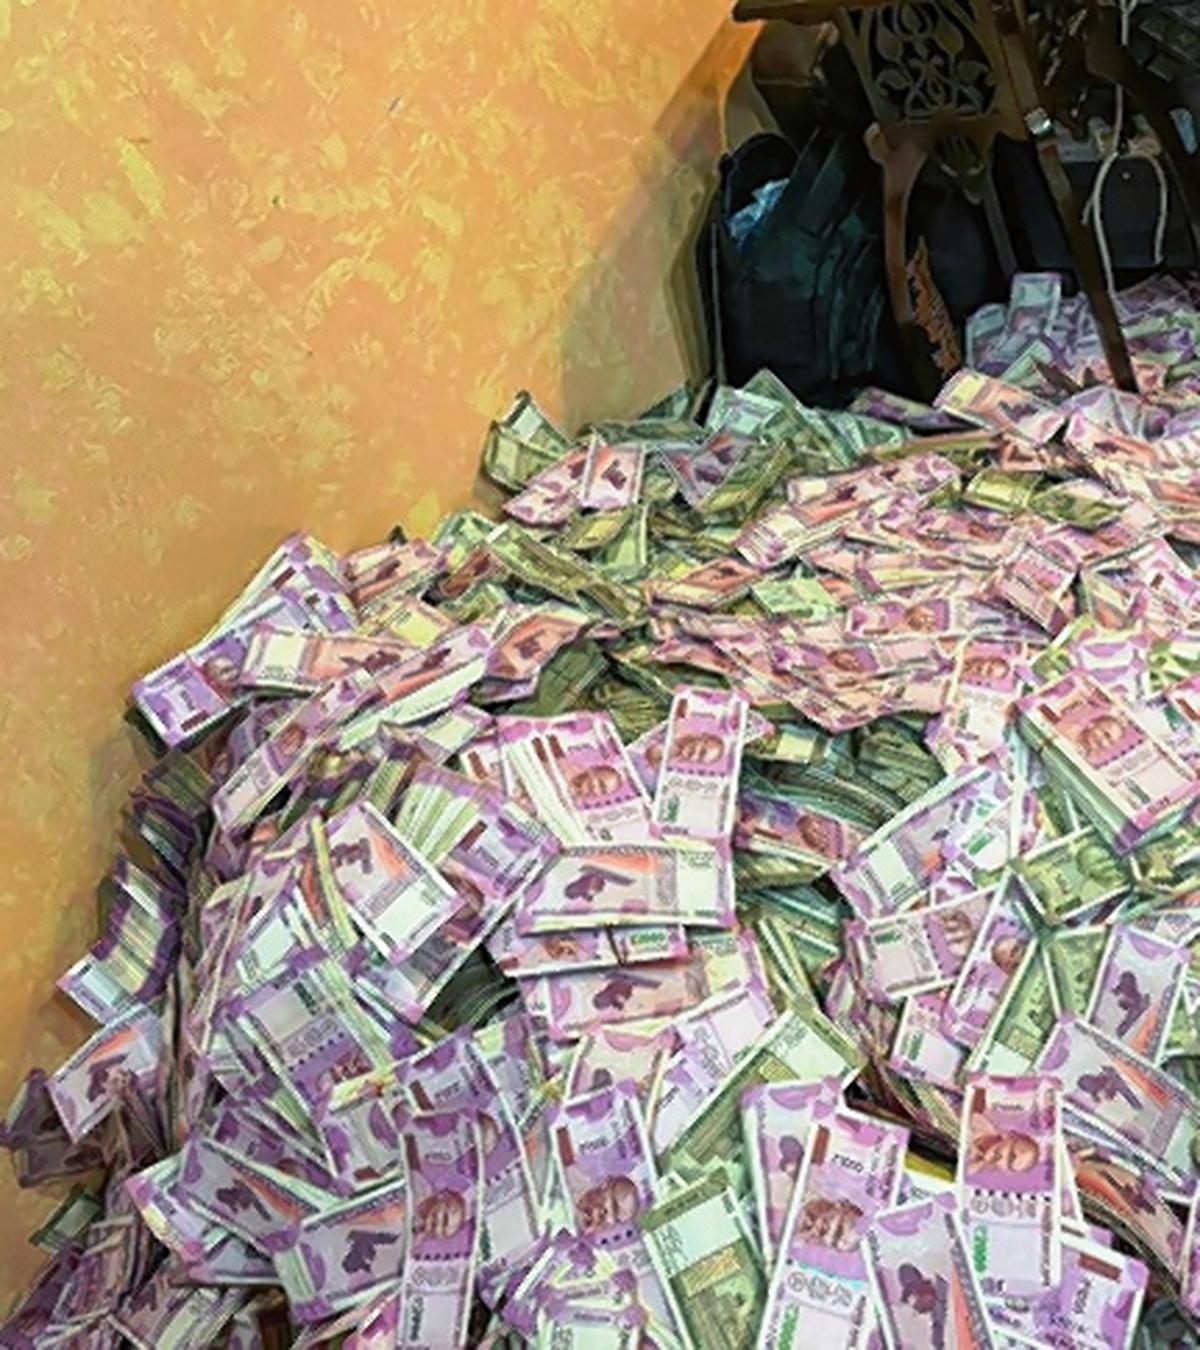 Cash seized by the Enforcement Directorate from the residence of an aide of Partha Chatterjee.